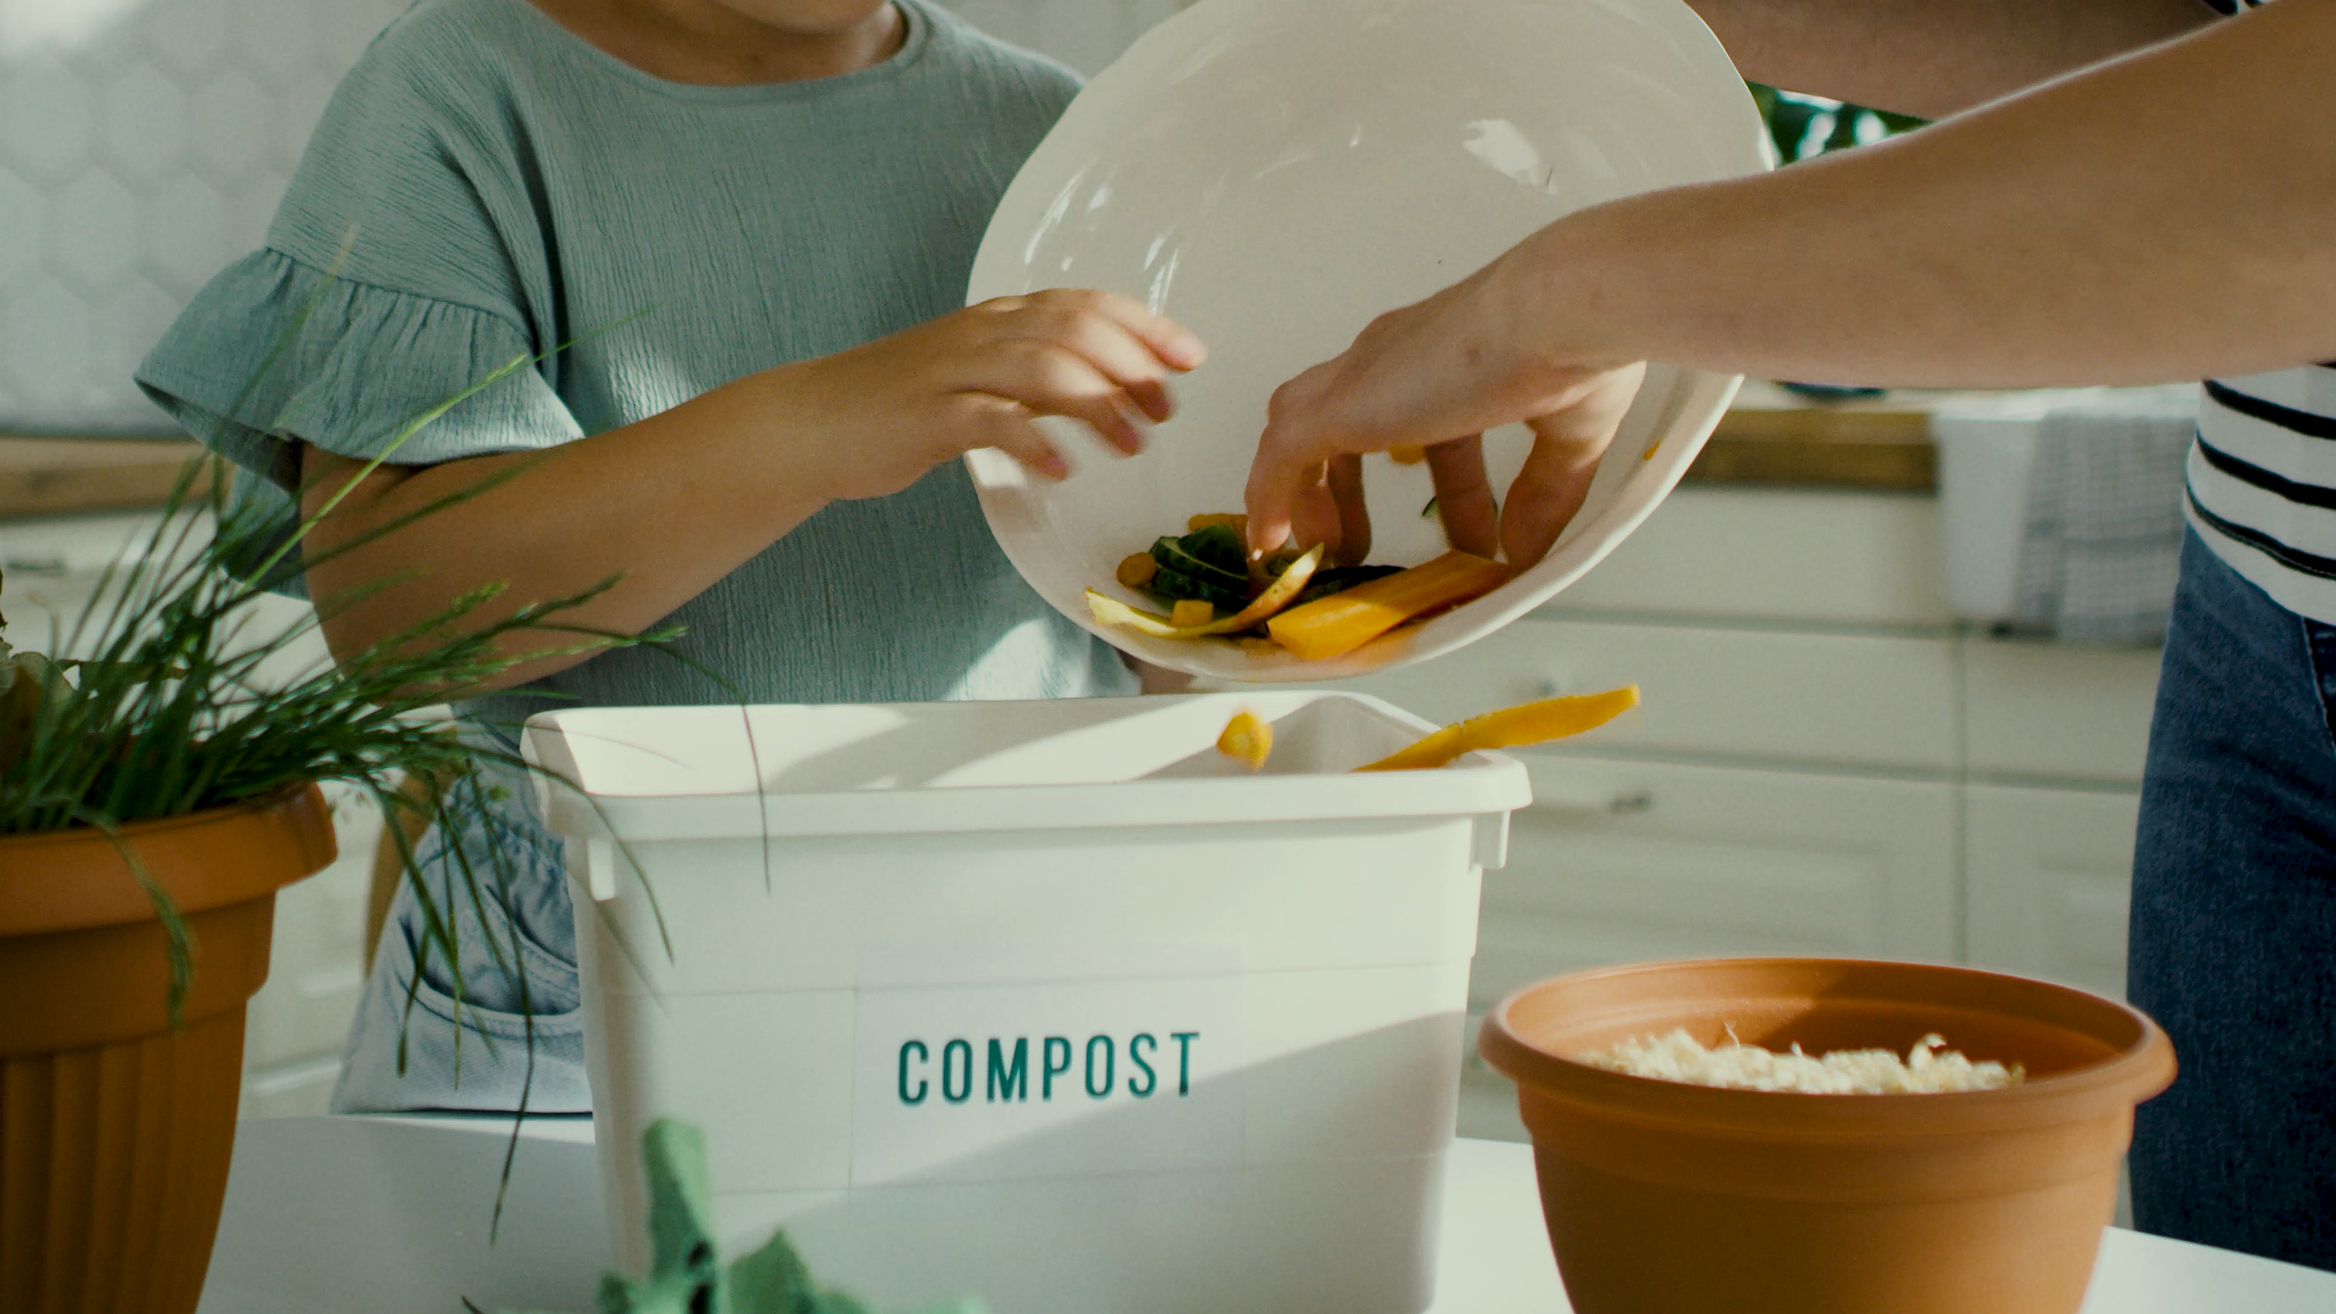 Composting - Making That First Step